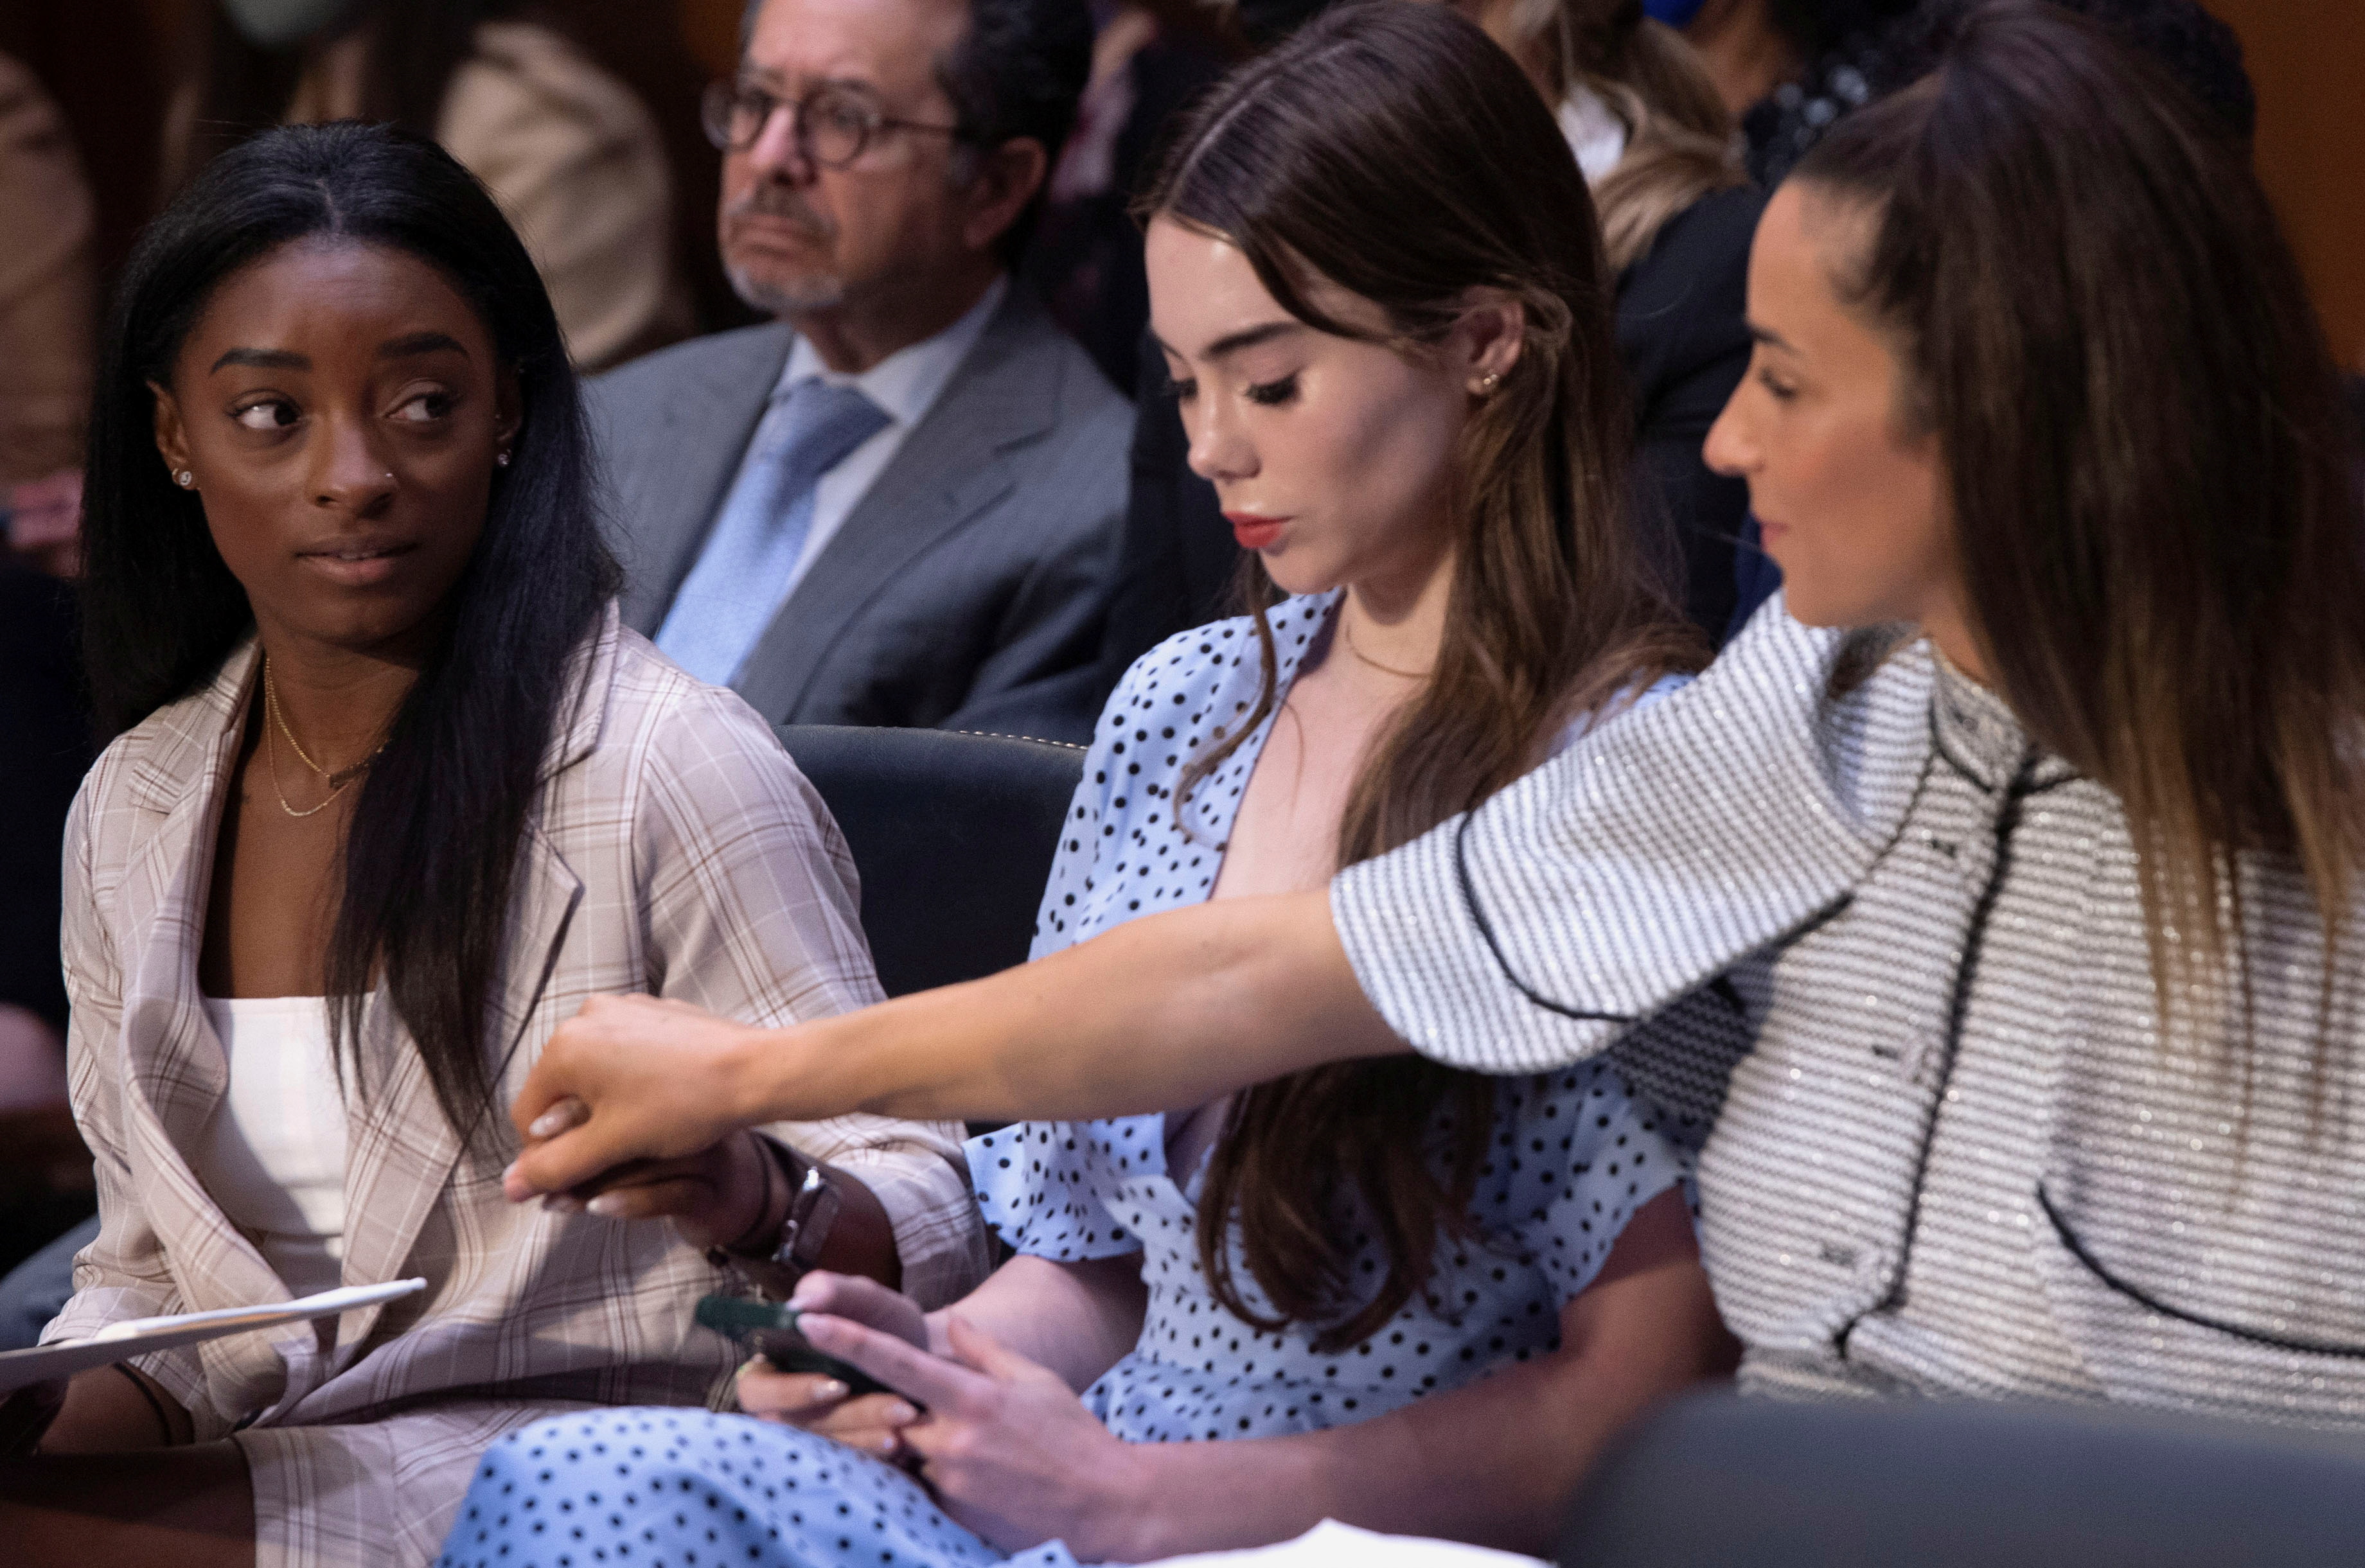 U.S. Olympic gymnasts Simone Biles, McKayla Maroney, Aly Raisman and Maggie Nichols (not pictured) arrive to testify during a Senate Judiciary hearing about the Inspector General's report on the FBI handling of the Larry Nassar investigation of sexual abuse of Olympic gymnasts, on Capitol Hill, in Washington, D.C., U.S., September 15, 2021. Saul Loeb/Pool via REUTERS